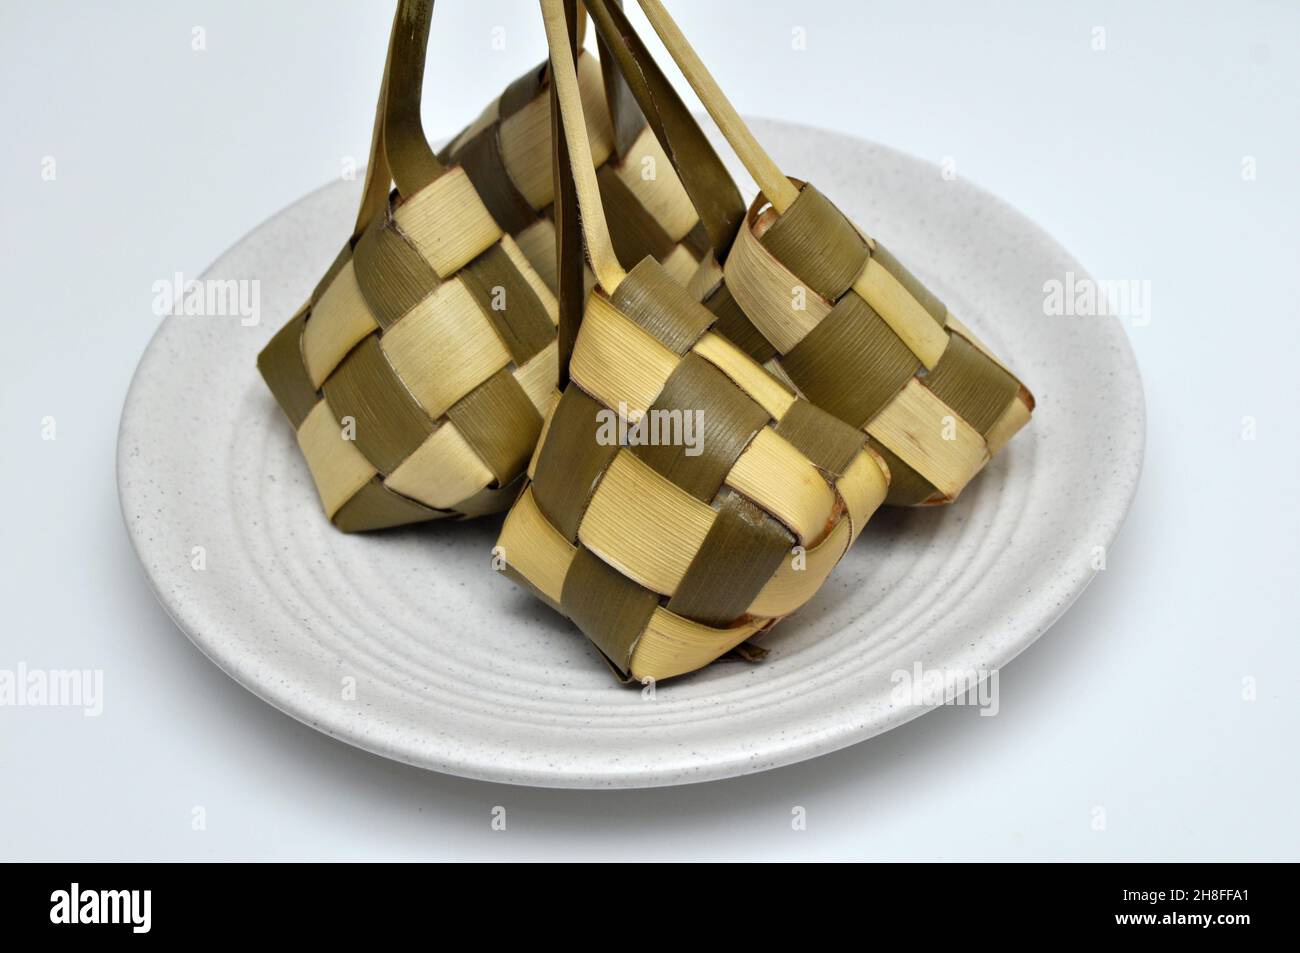 Ketupat is a type of dumpling made from rice packed inside a diamond-shaped container of woven palm leaf pouch. commonly found in Indonesia, Malaysia, Stock Photo